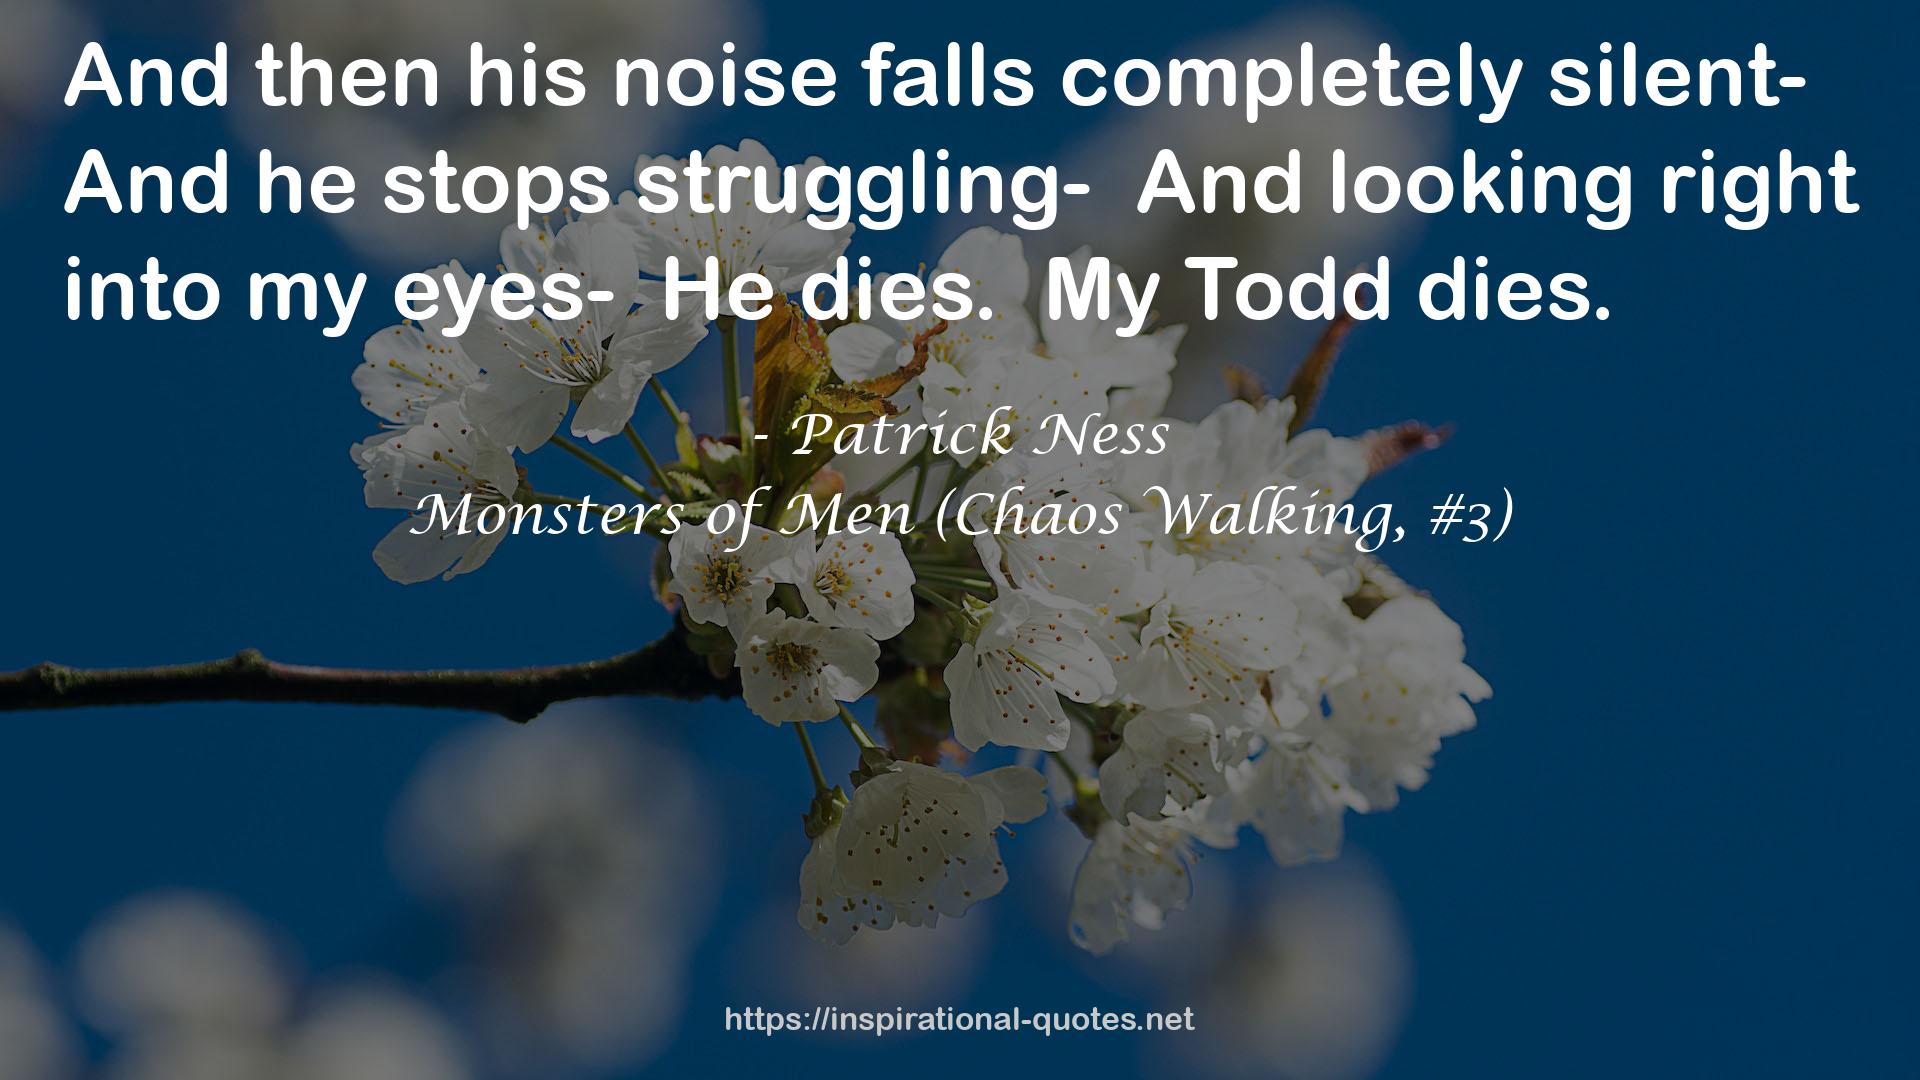 Monsters of Men (Chaos Walking, #3) QUOTES